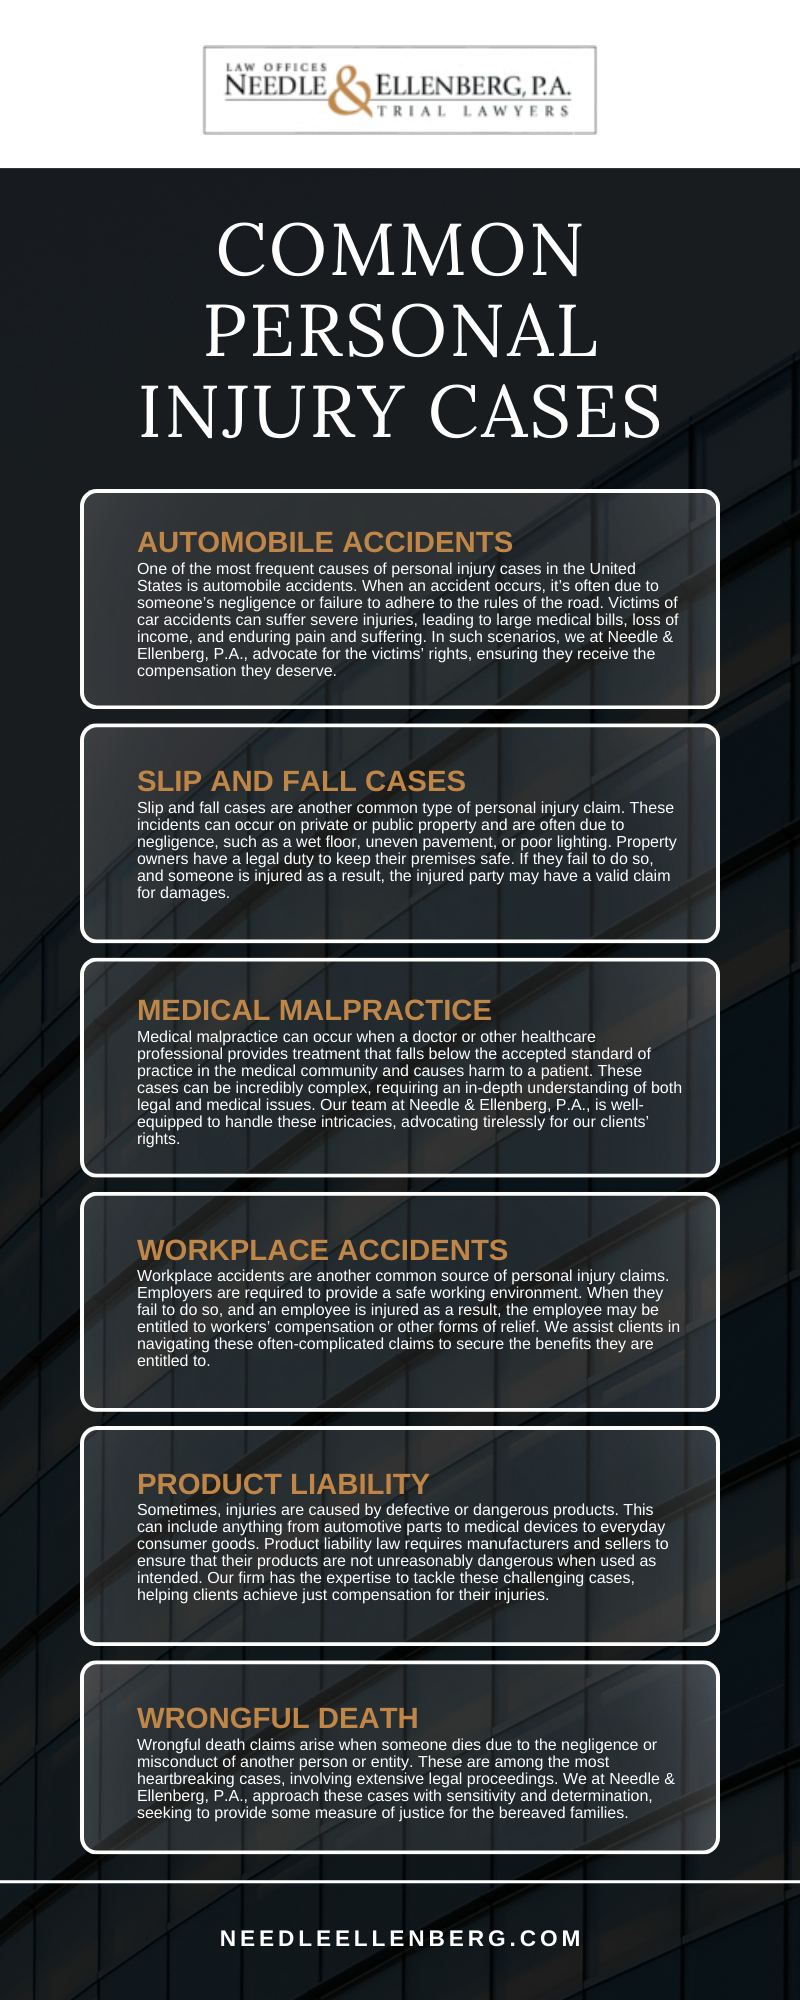 Common Personal Injury Cases Infographic